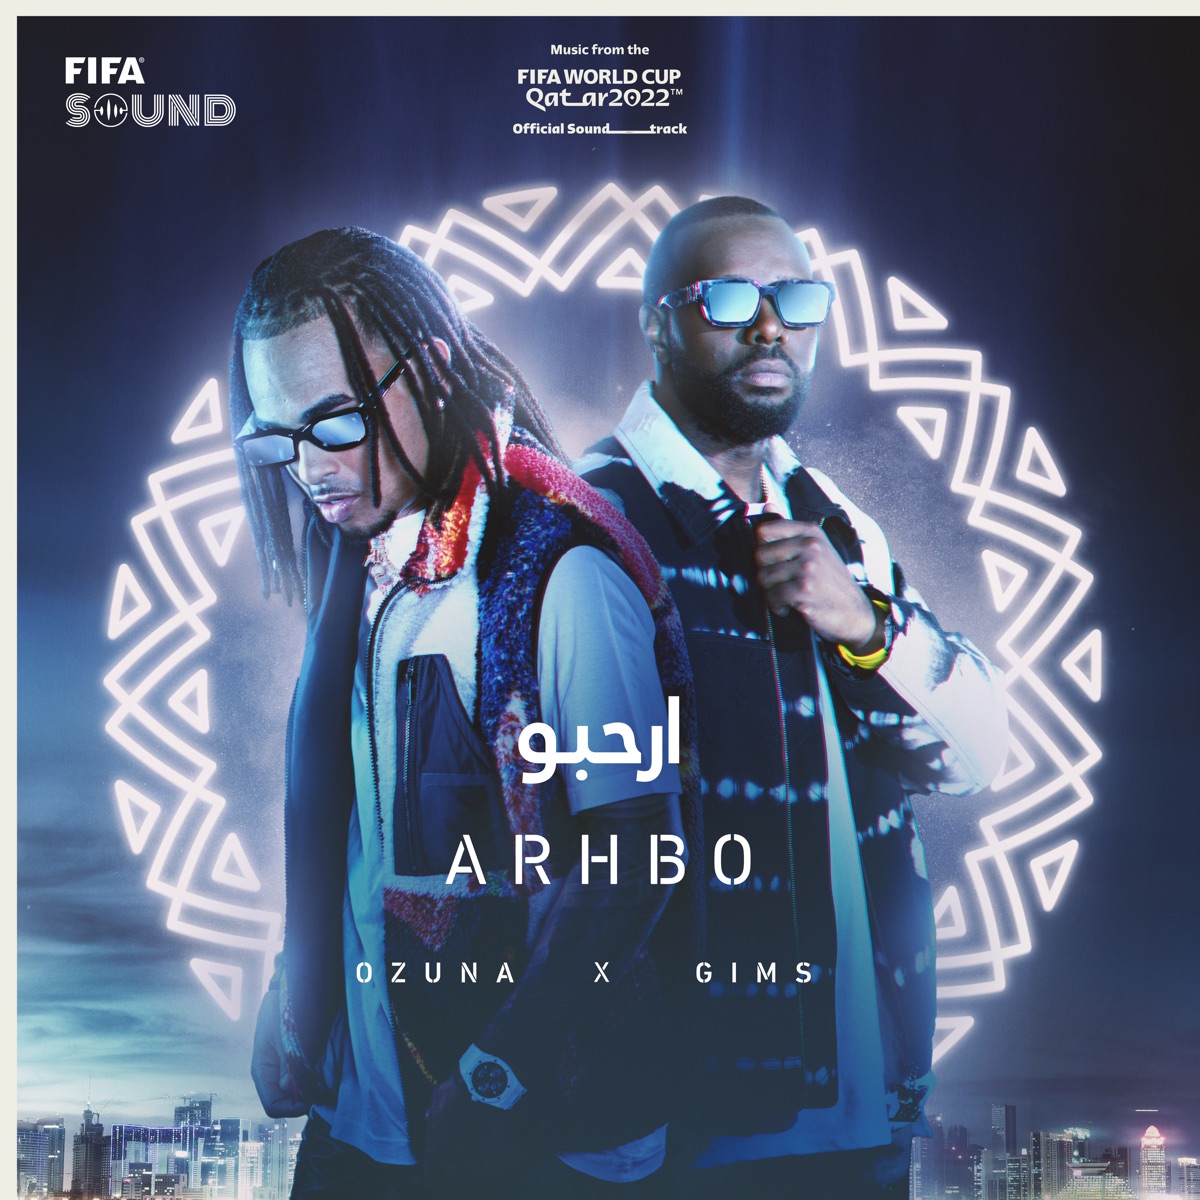 Arhbo (Music from the Fifa World Cup Qatar 2022 Official Soundtrack) [feat.  FIFA Sound] - Single - Album by Ozuna, GIMS & RedOne - Apple Music